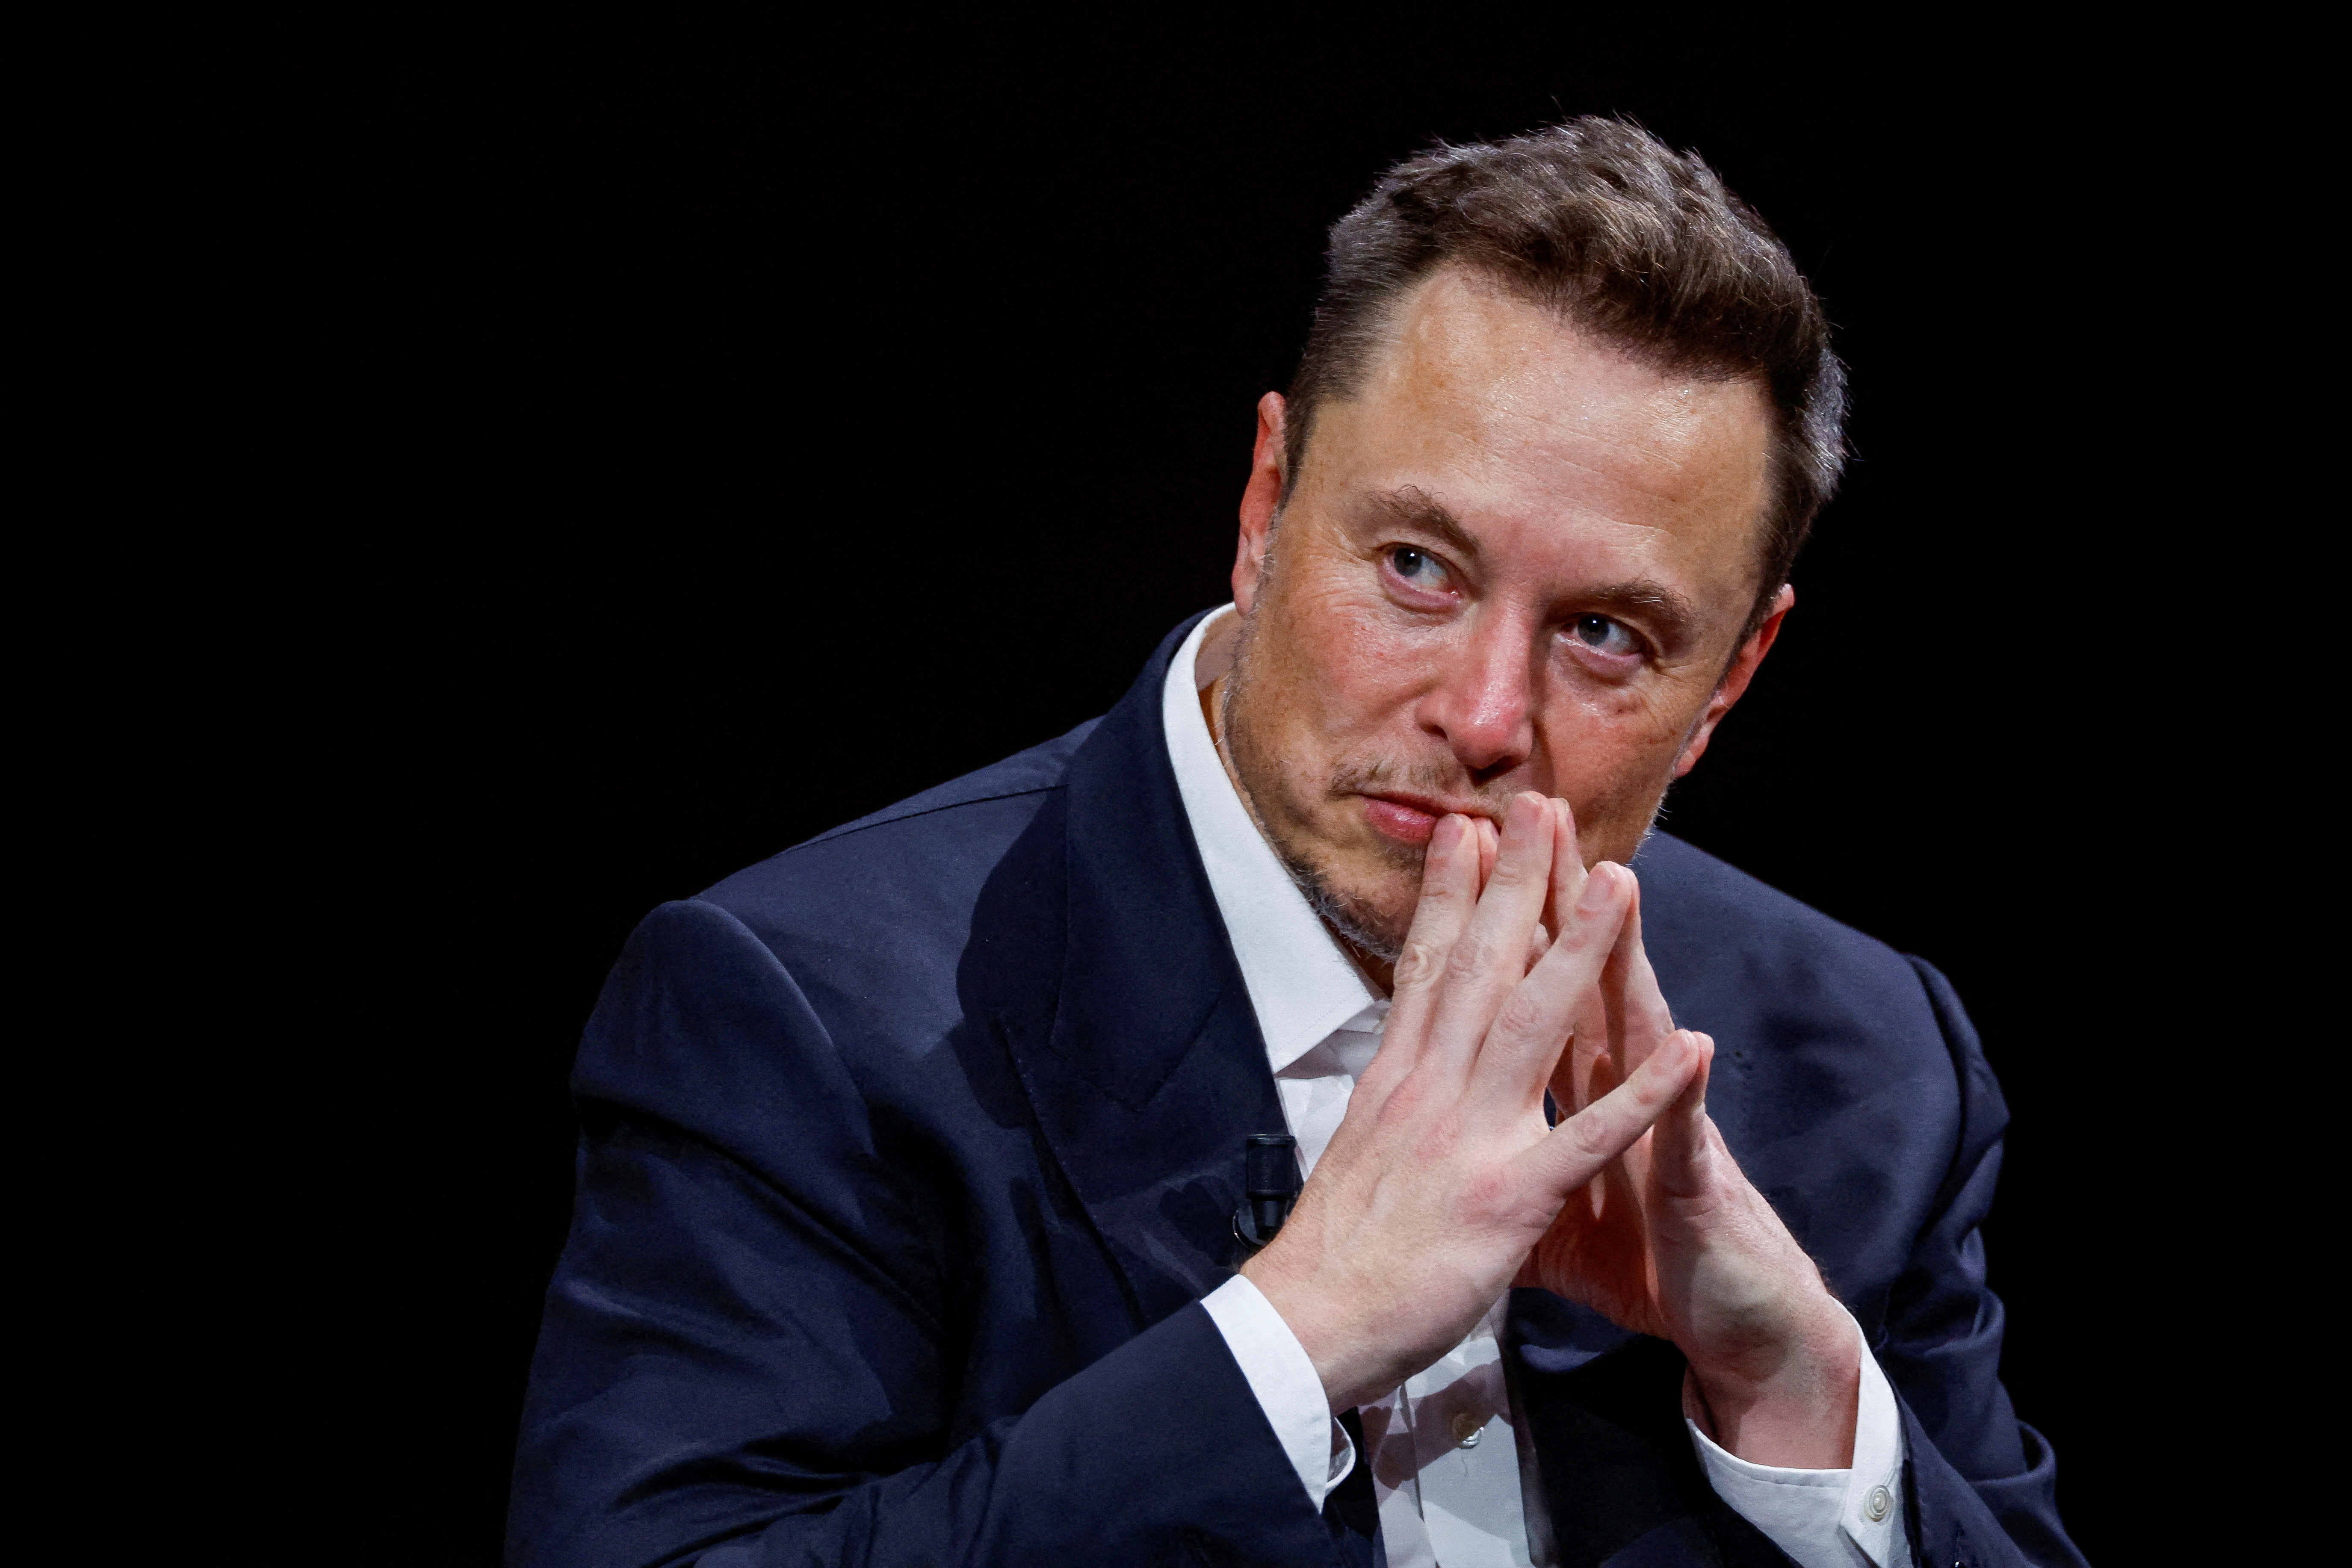 Elon Musk offers $1 billion to Wikipedia; but, there is a condition